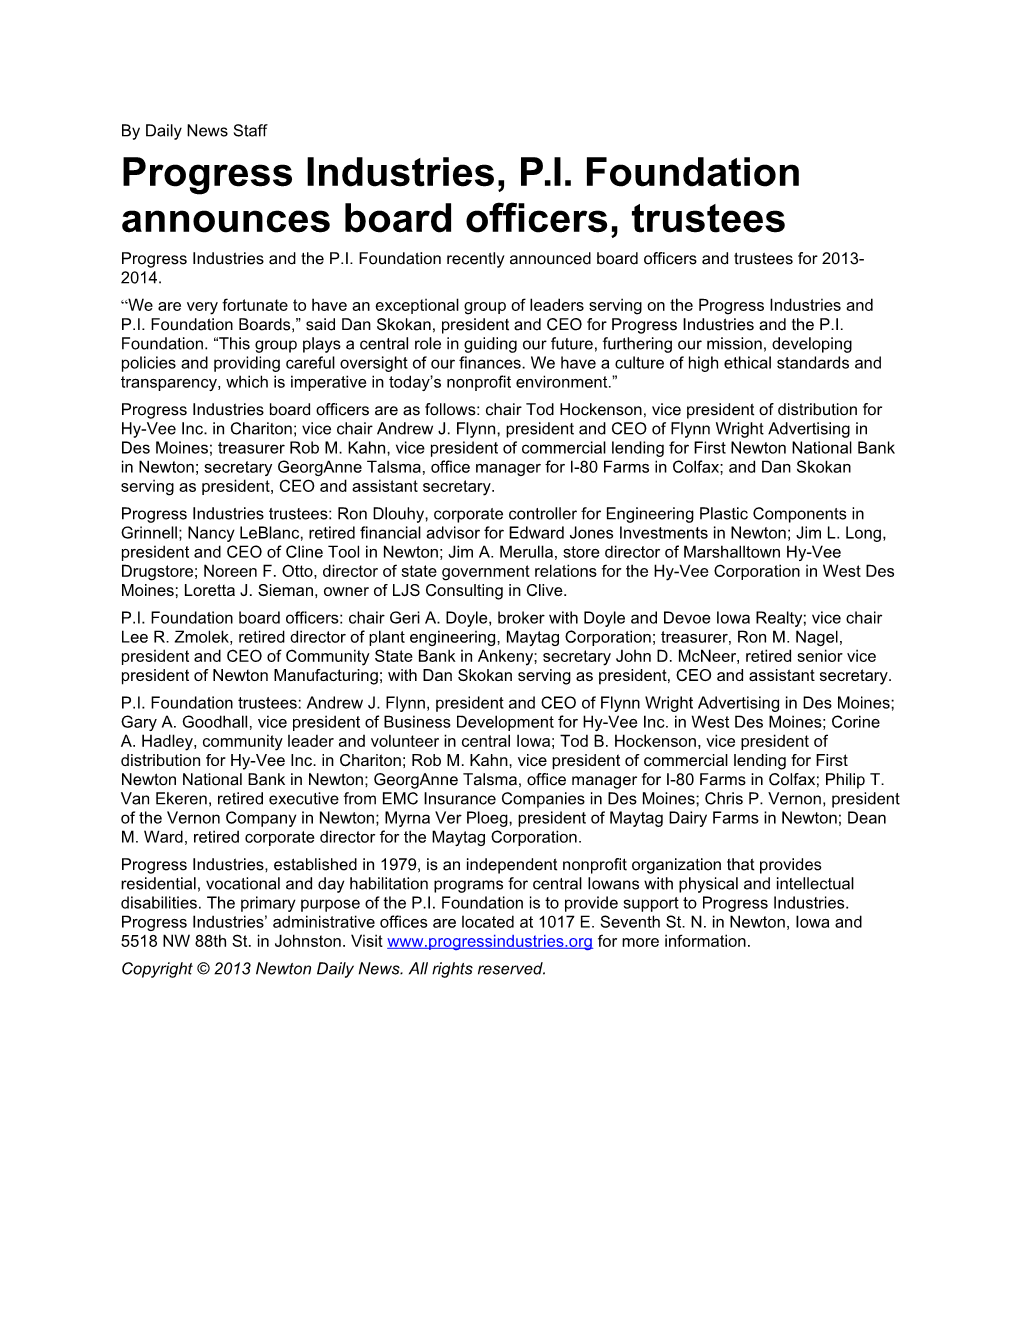 Progress Industries, P.I. Foundation Announces Board Officers, Trustees